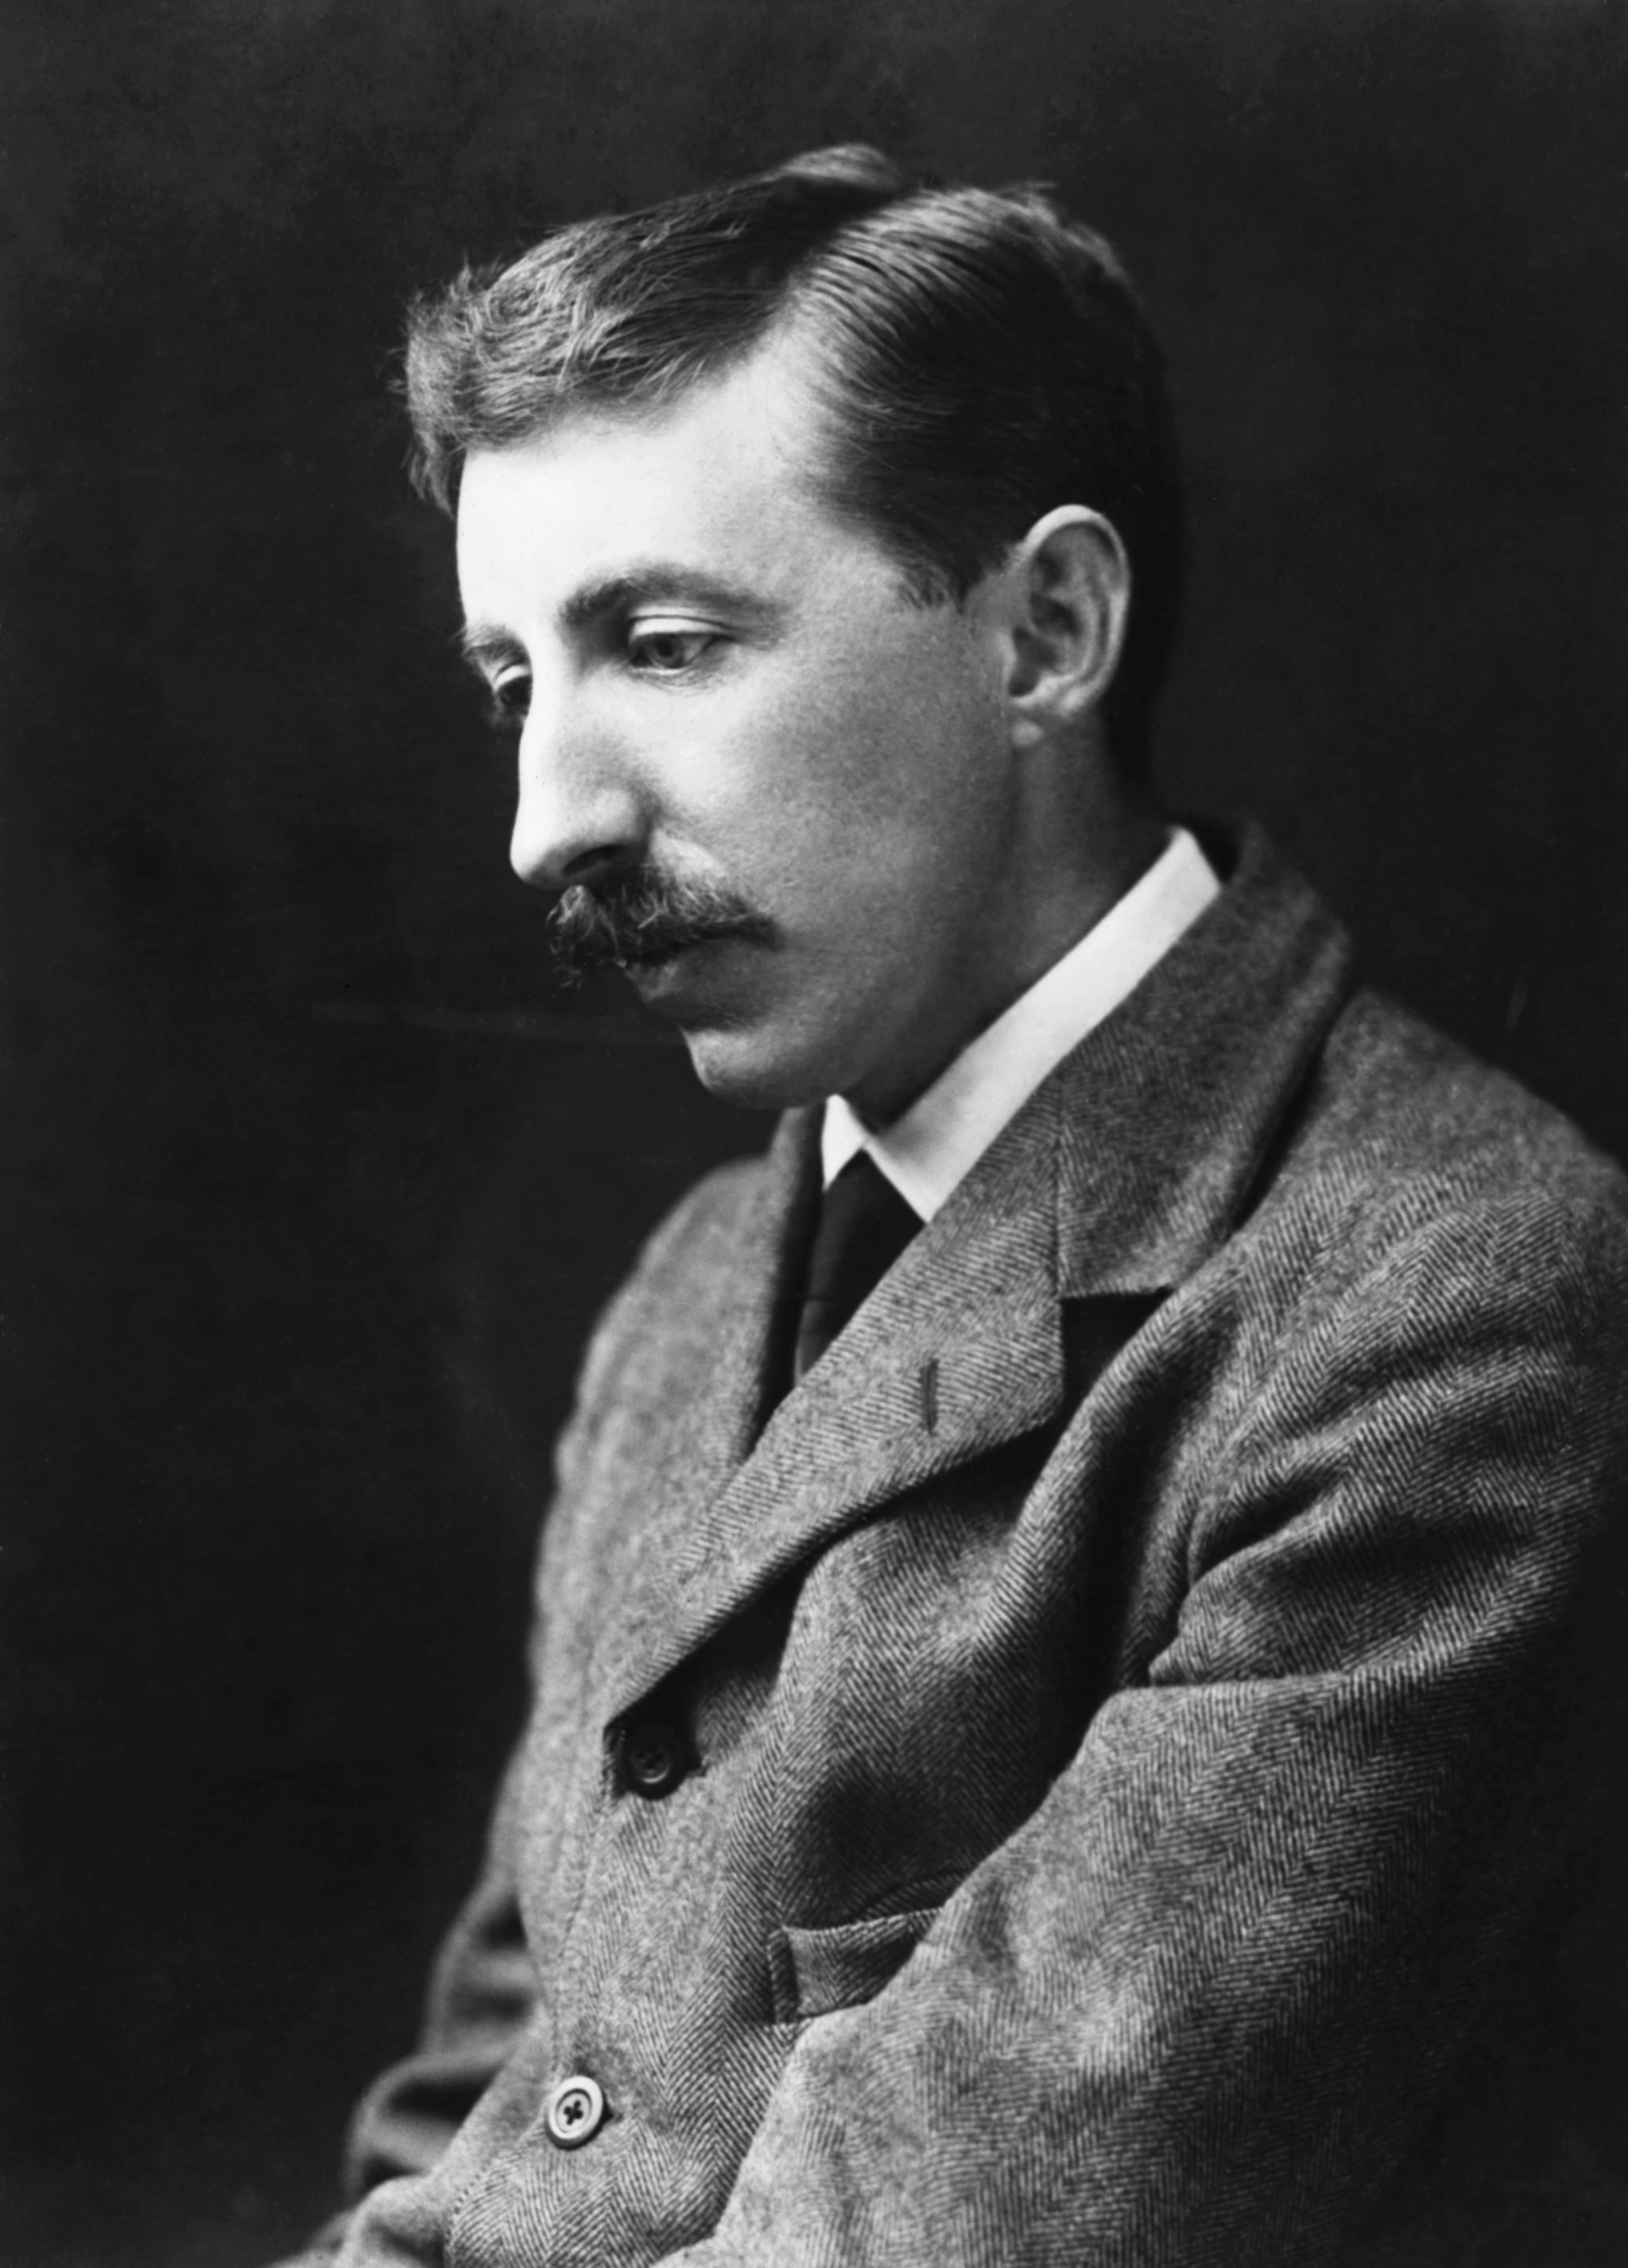 E.M. Forster (1879-1970) the English novelist & critic. His novels include: Howards End (1910),A Room with a View (1908) and A Passage to India (1924). (Photo by © Hulton-Deutsch Collection/CORBIS/Corbis via Getty Images)